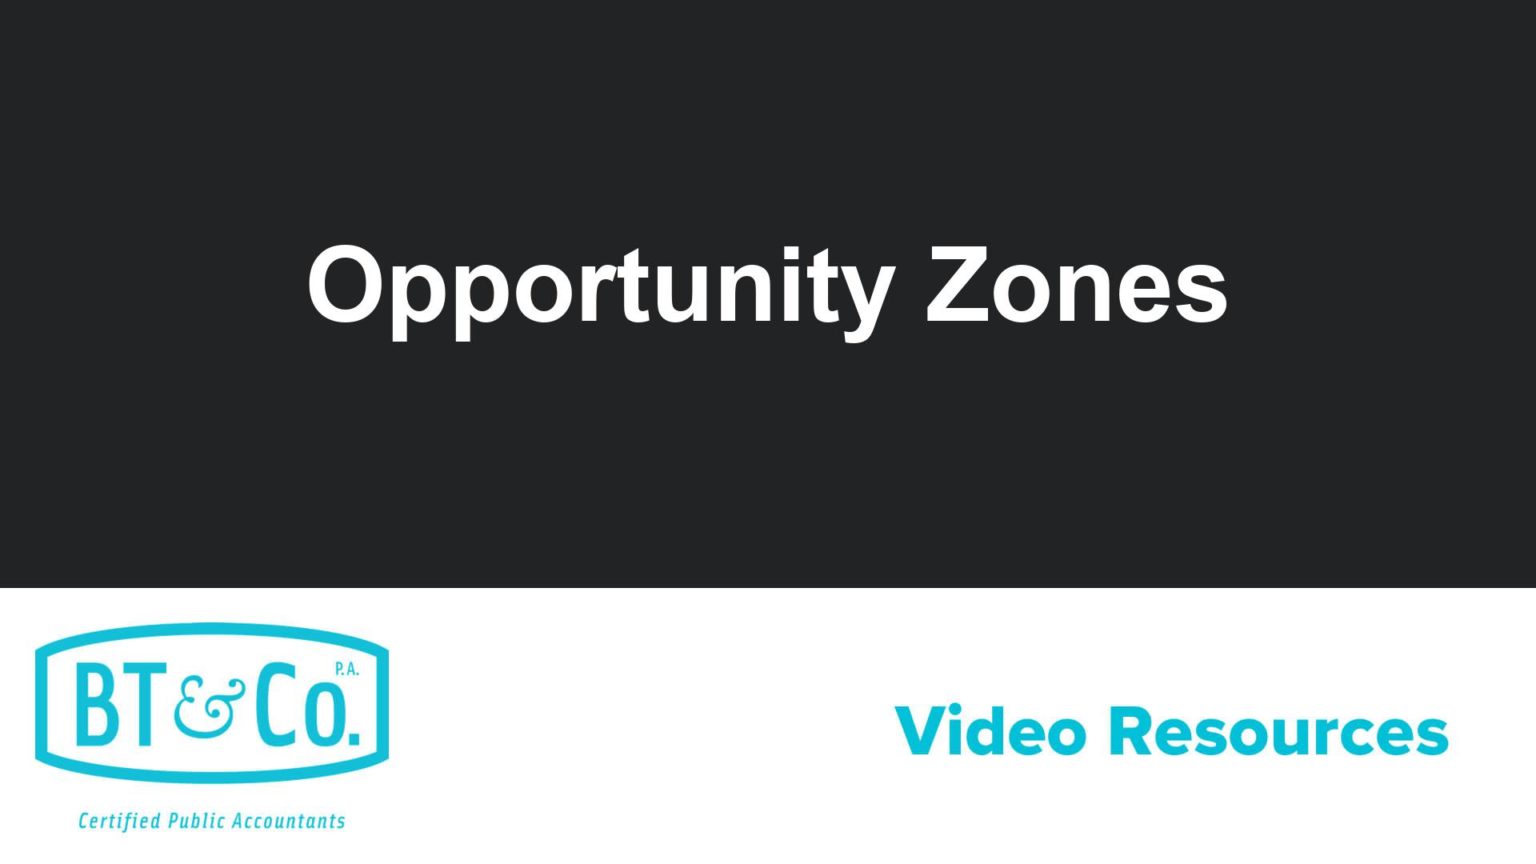 All About Opportunity Zones